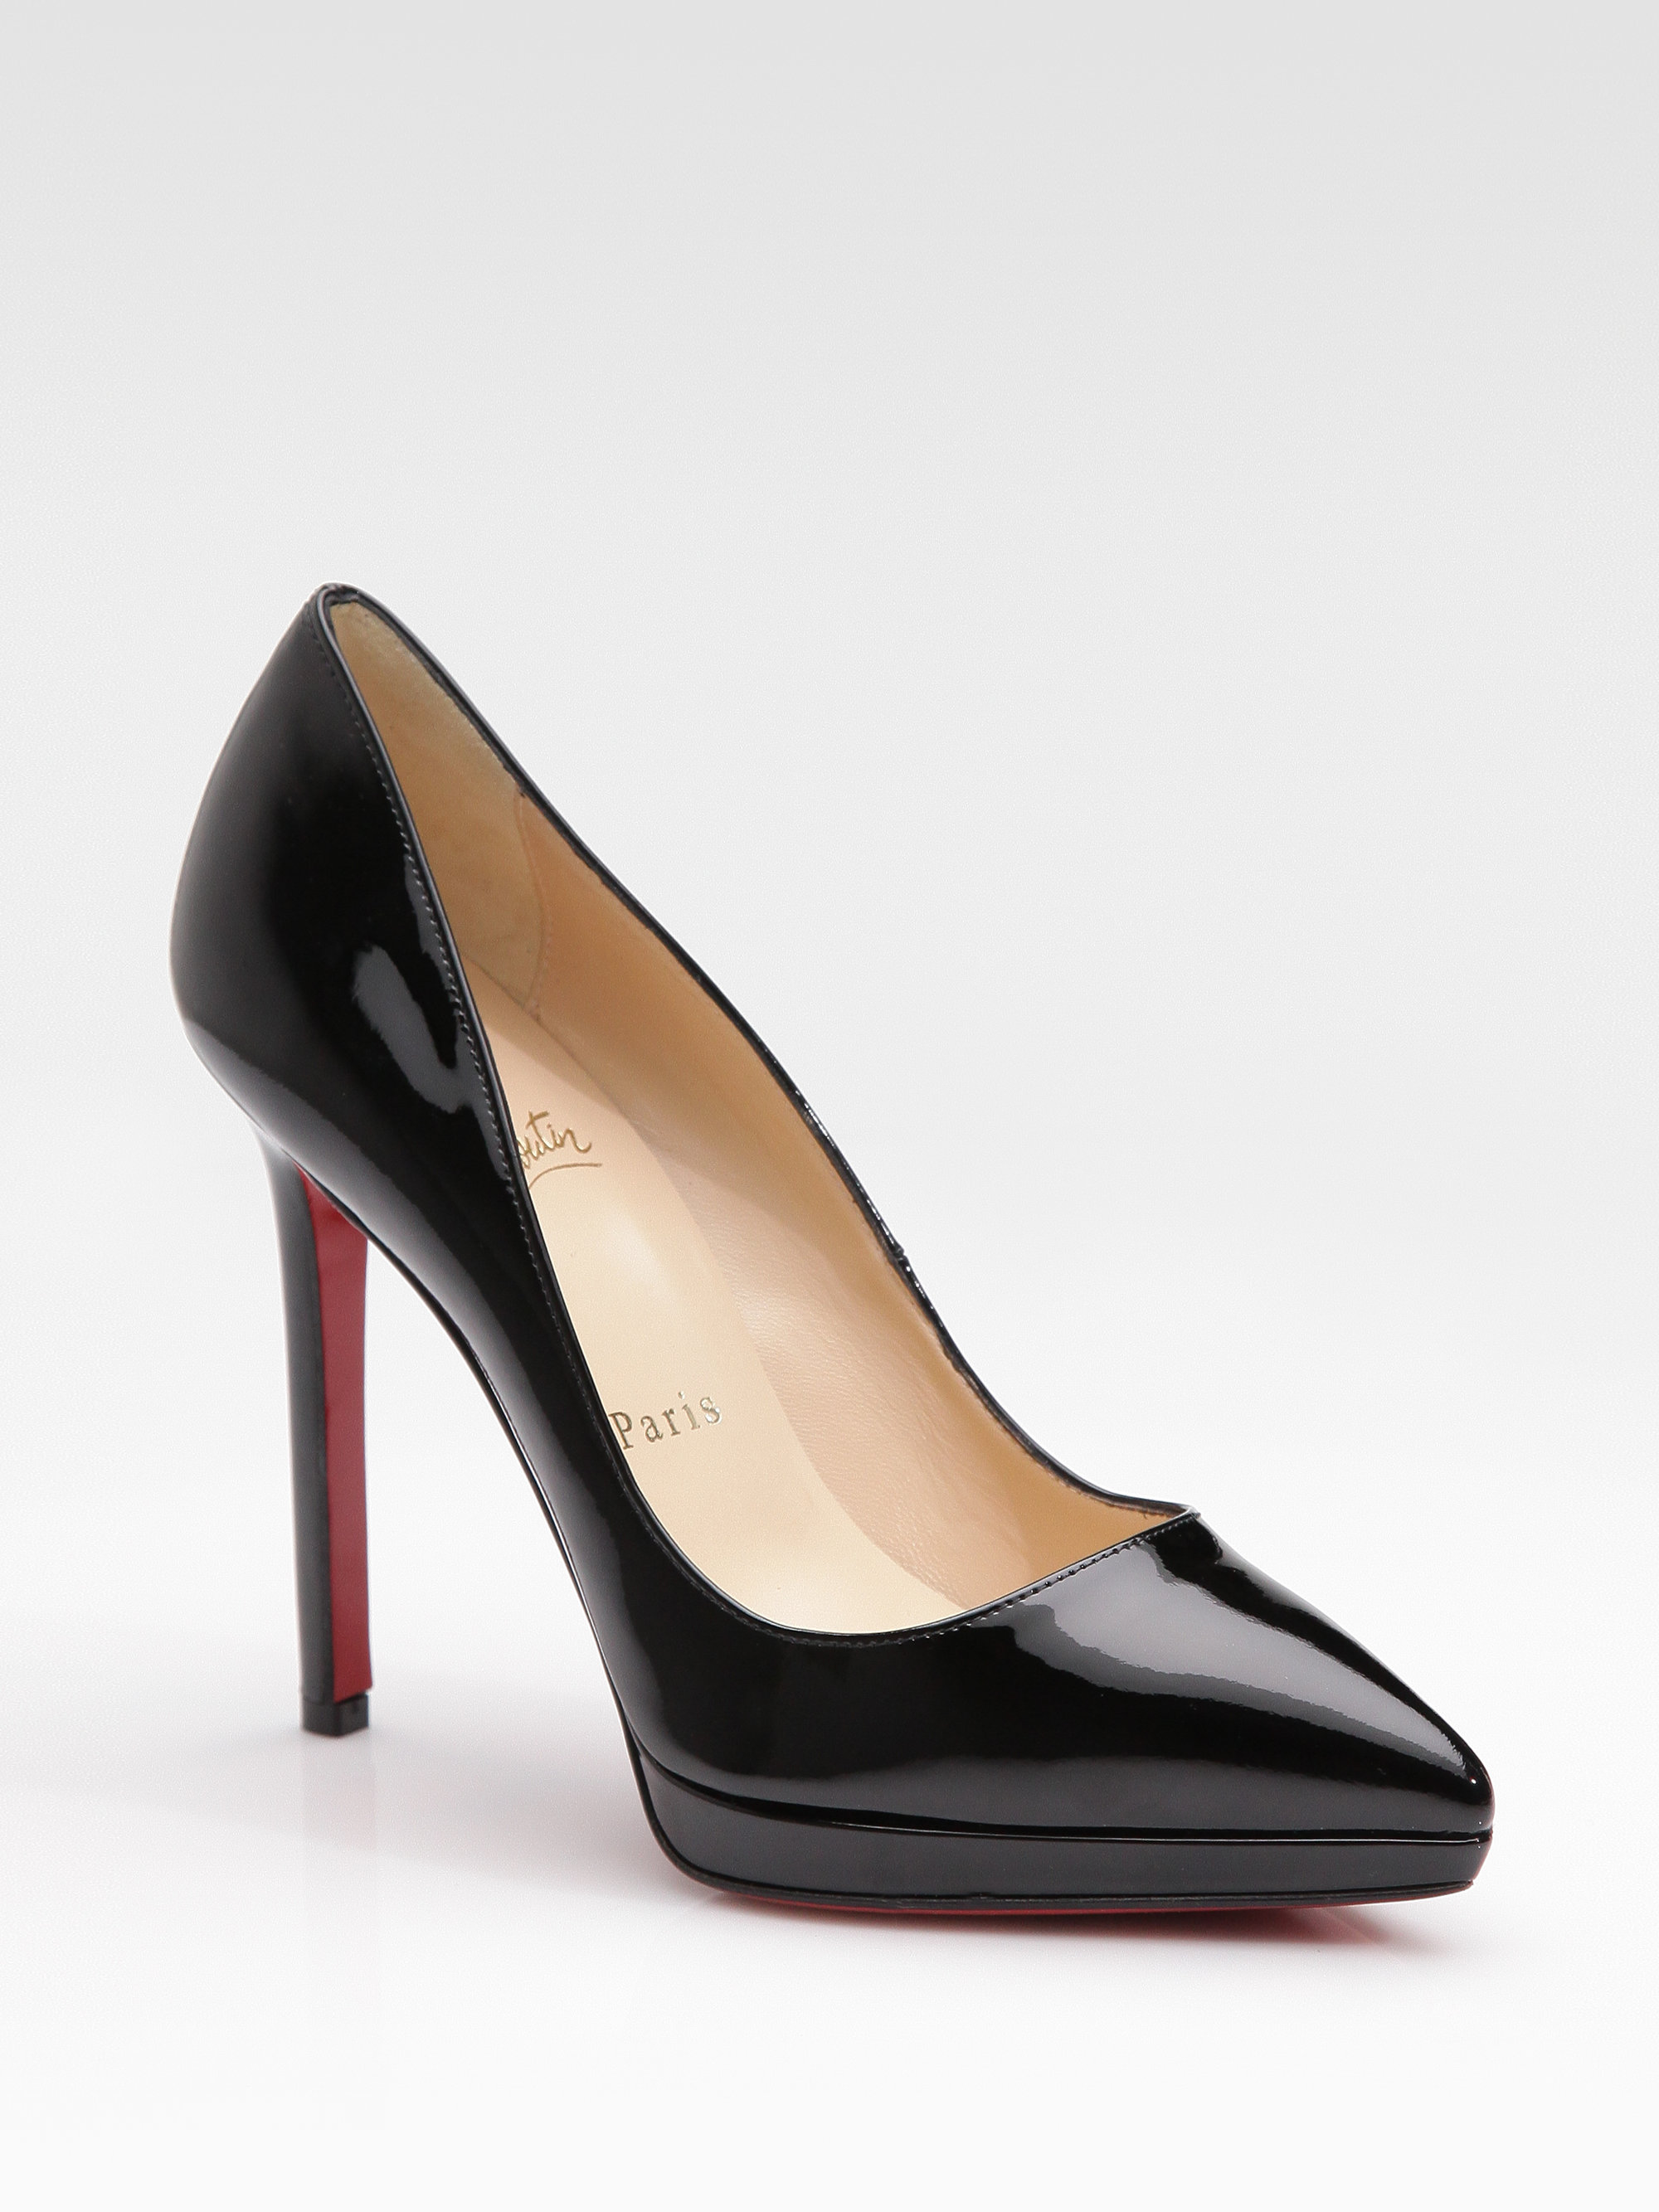 Christian louboutin Pigalle Plato Patent Leather Platform Pumps in